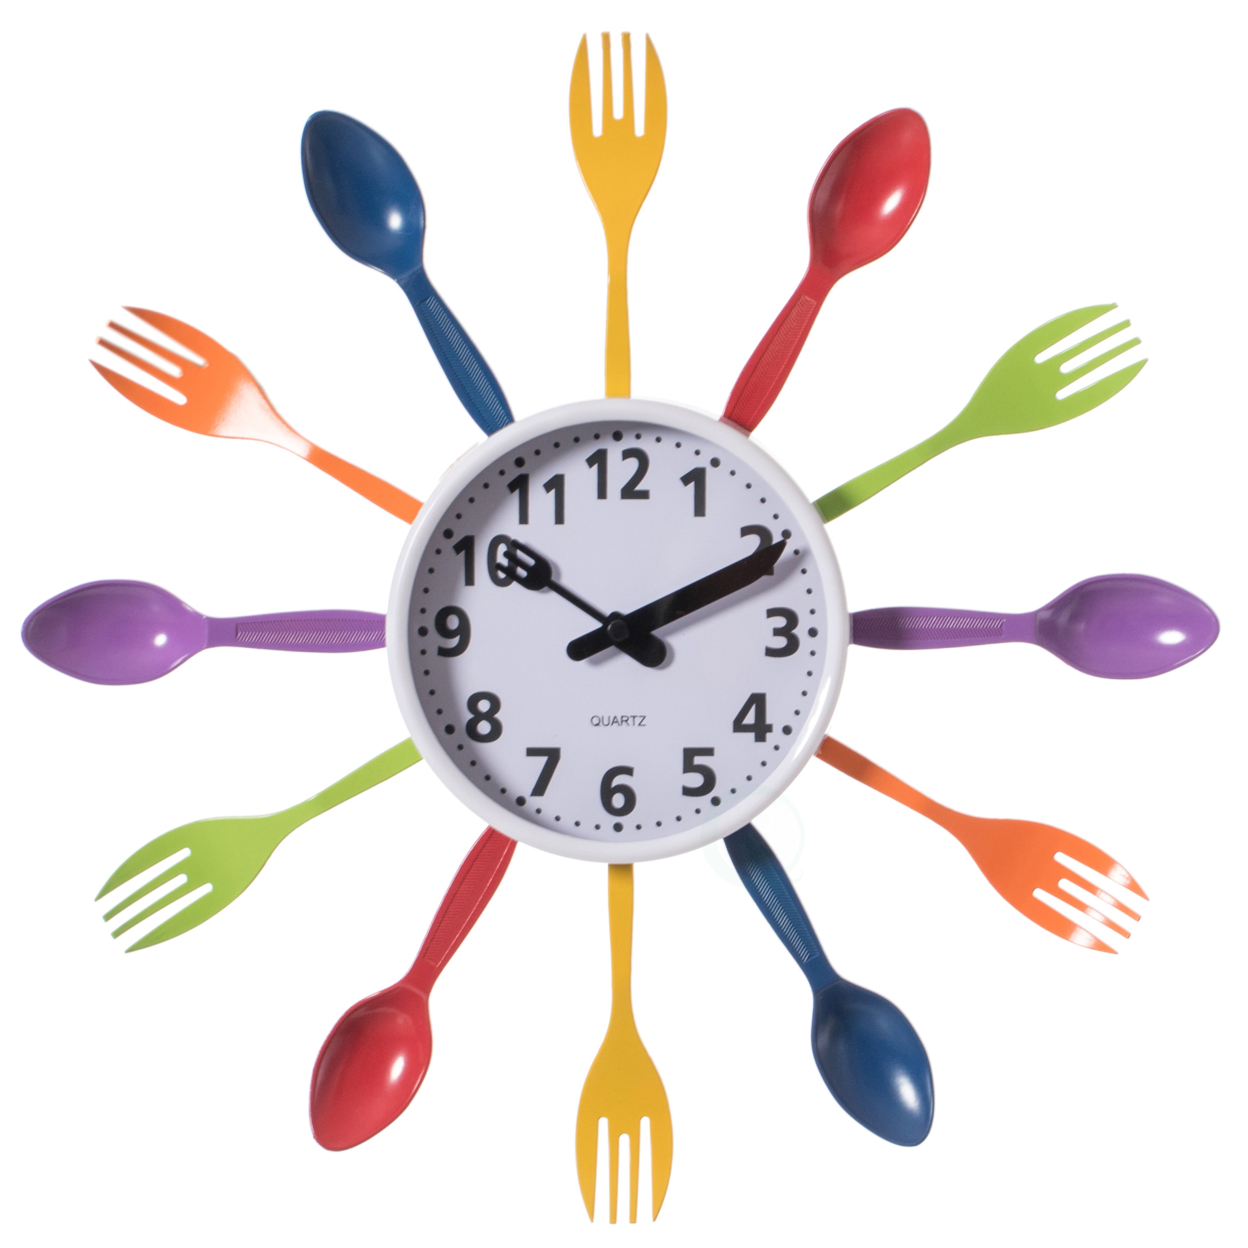 Decorative 3D Cutlery Utensil Spoon And Fork Wall Clock For Kitchen, Playroom Or Bedroom - Multicolor